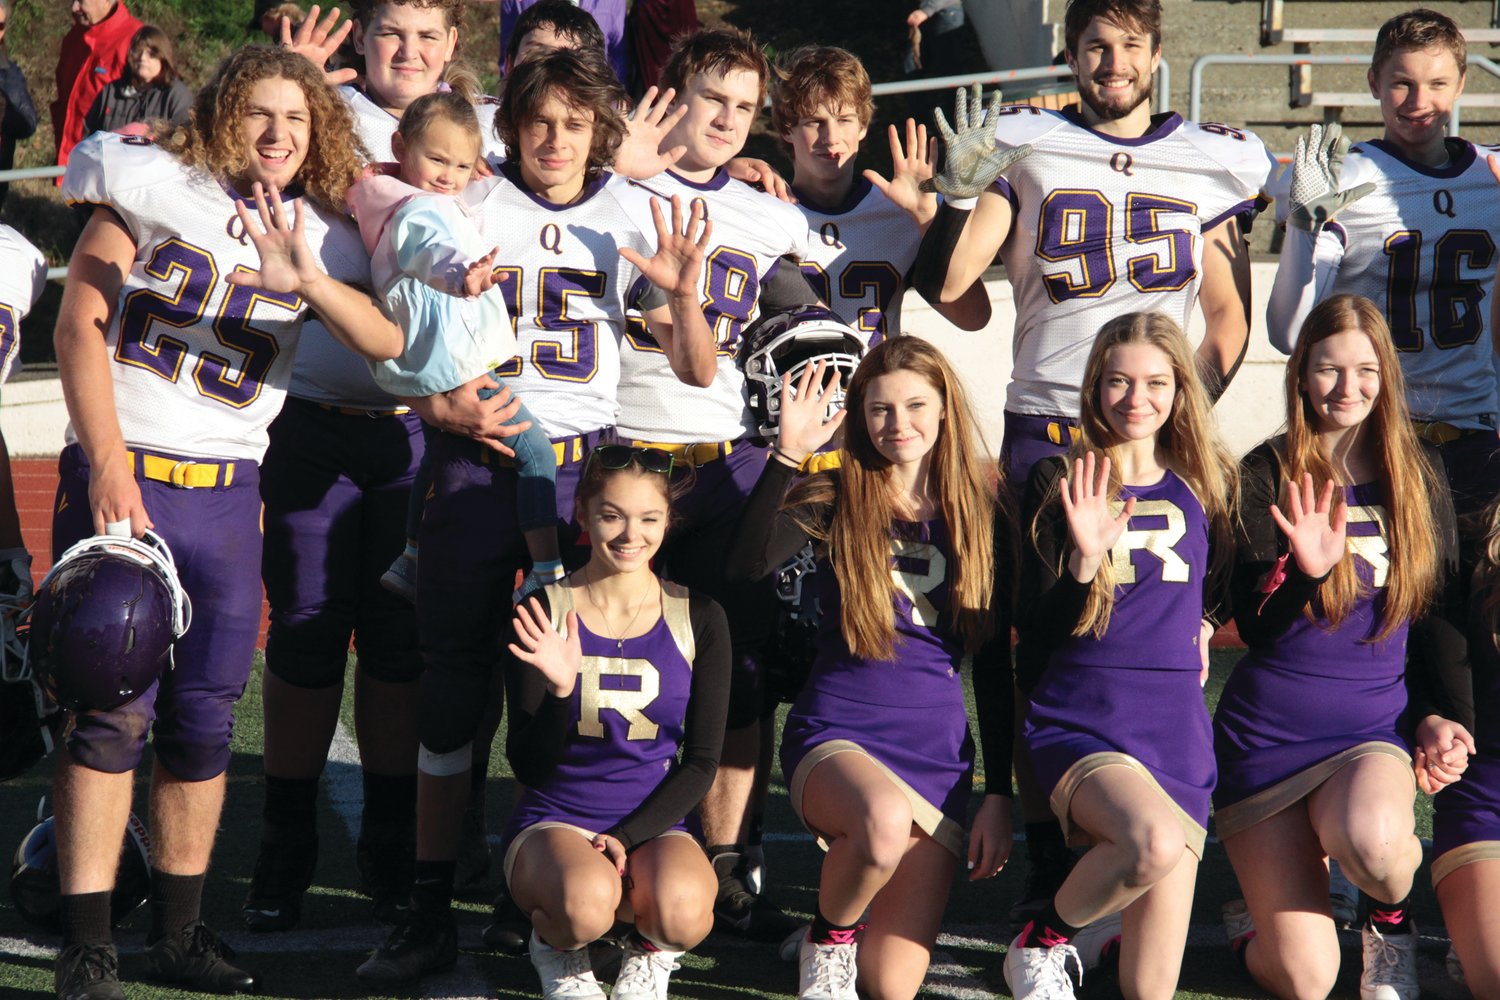 Members of the Quilcene Rangers football team and cheer squad flash fives during an after-game photo on the field following the win against Evergreen Lutheran.